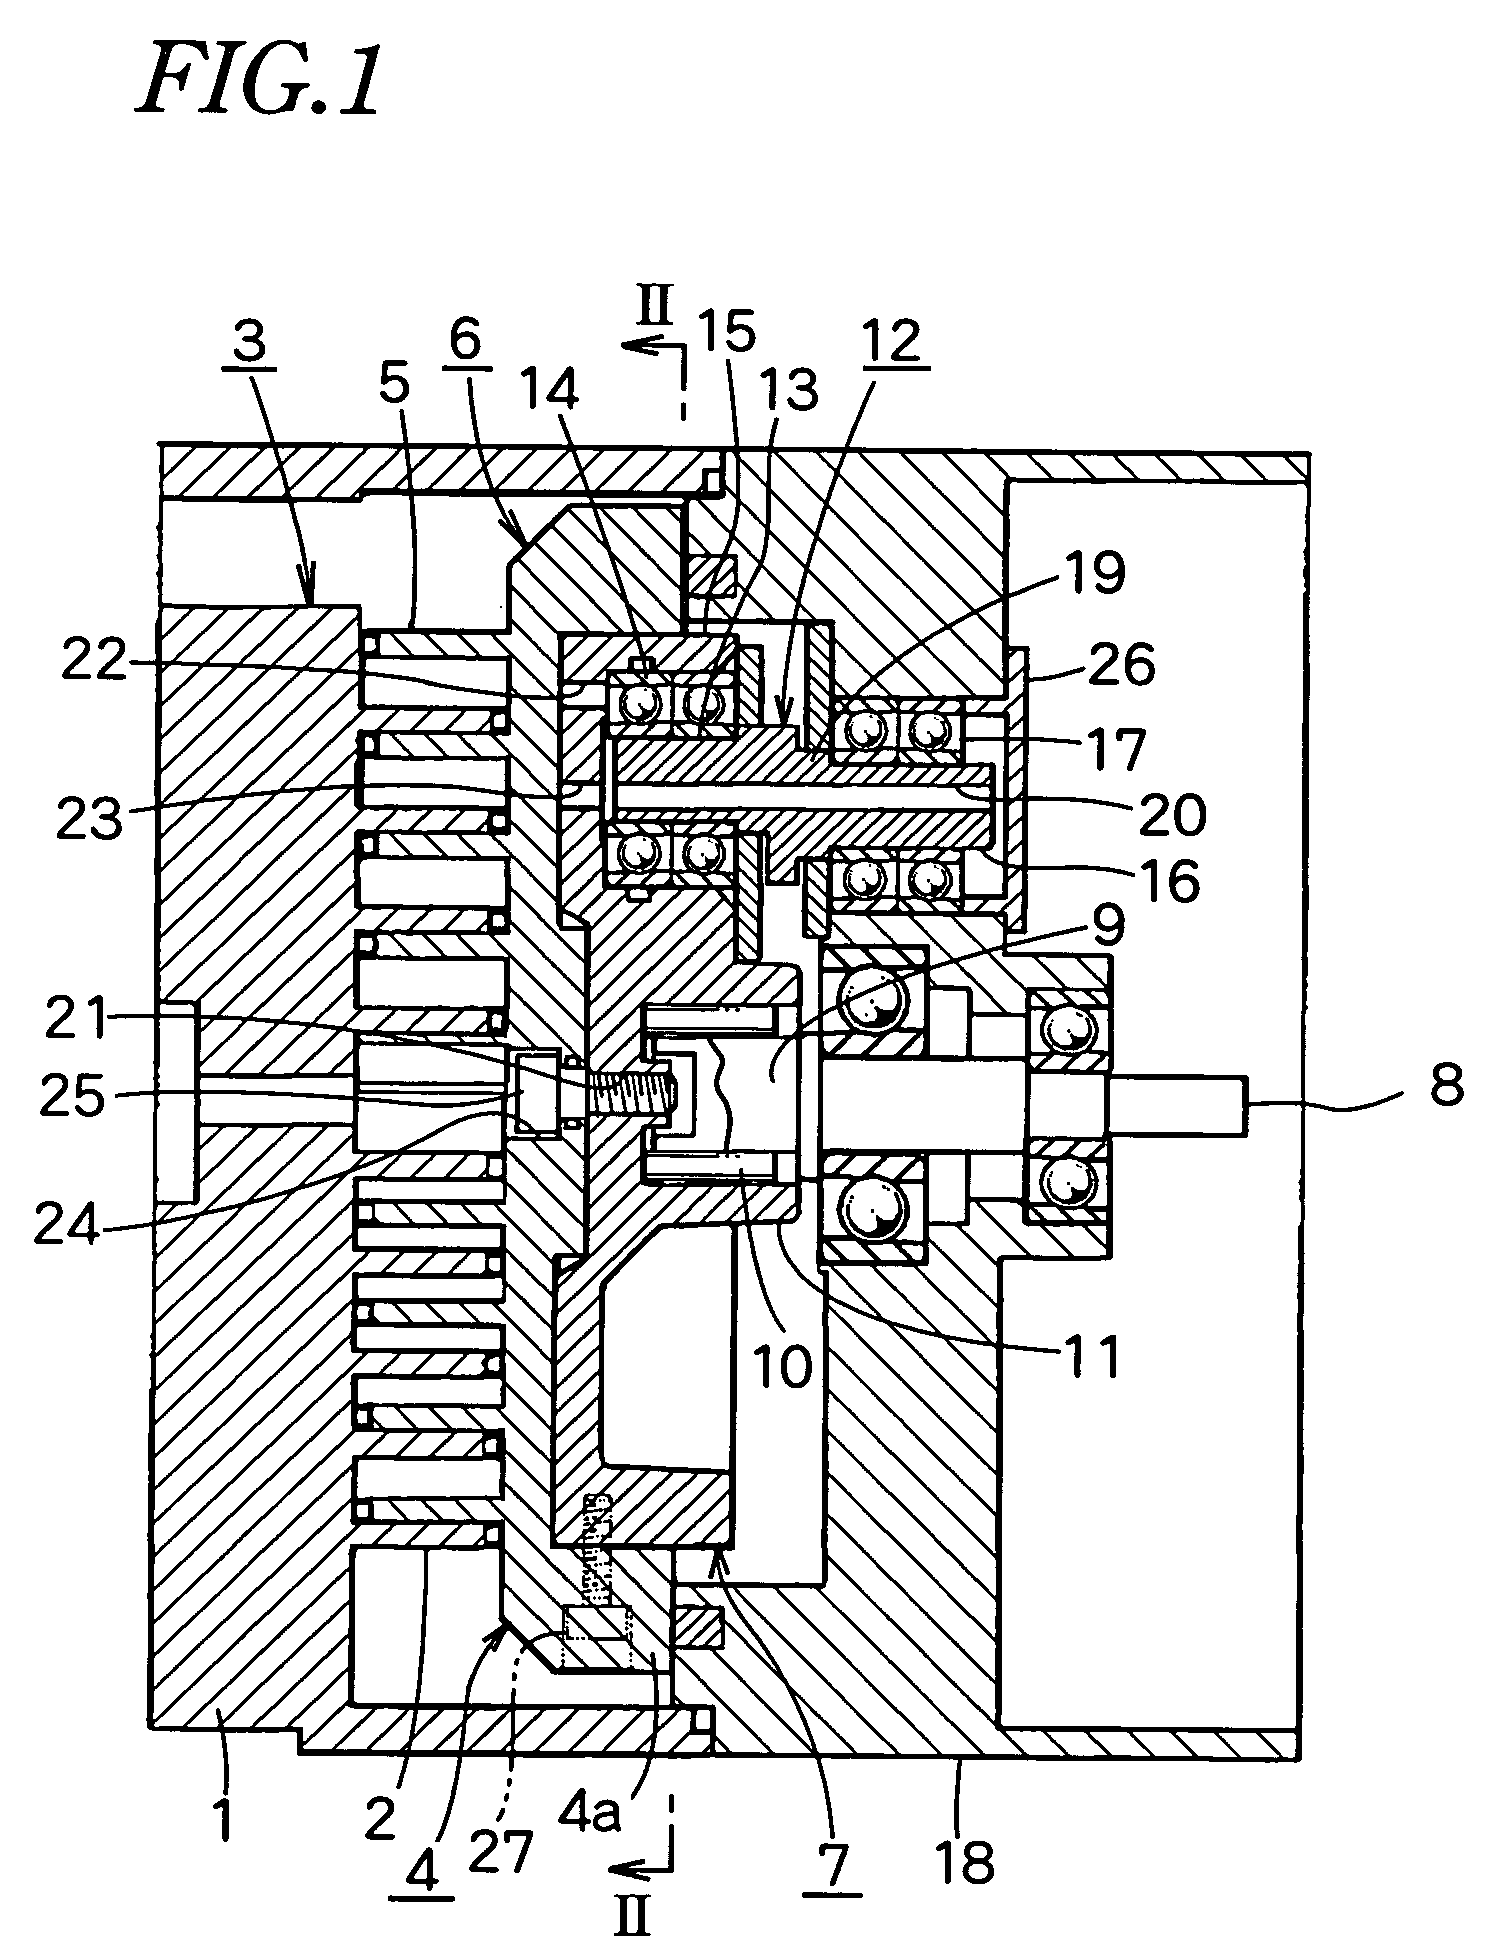 Scroll fluid machine having oil-supply holes being formed through a reinforcement bearing plate on a rear surface of the orbiting scroll